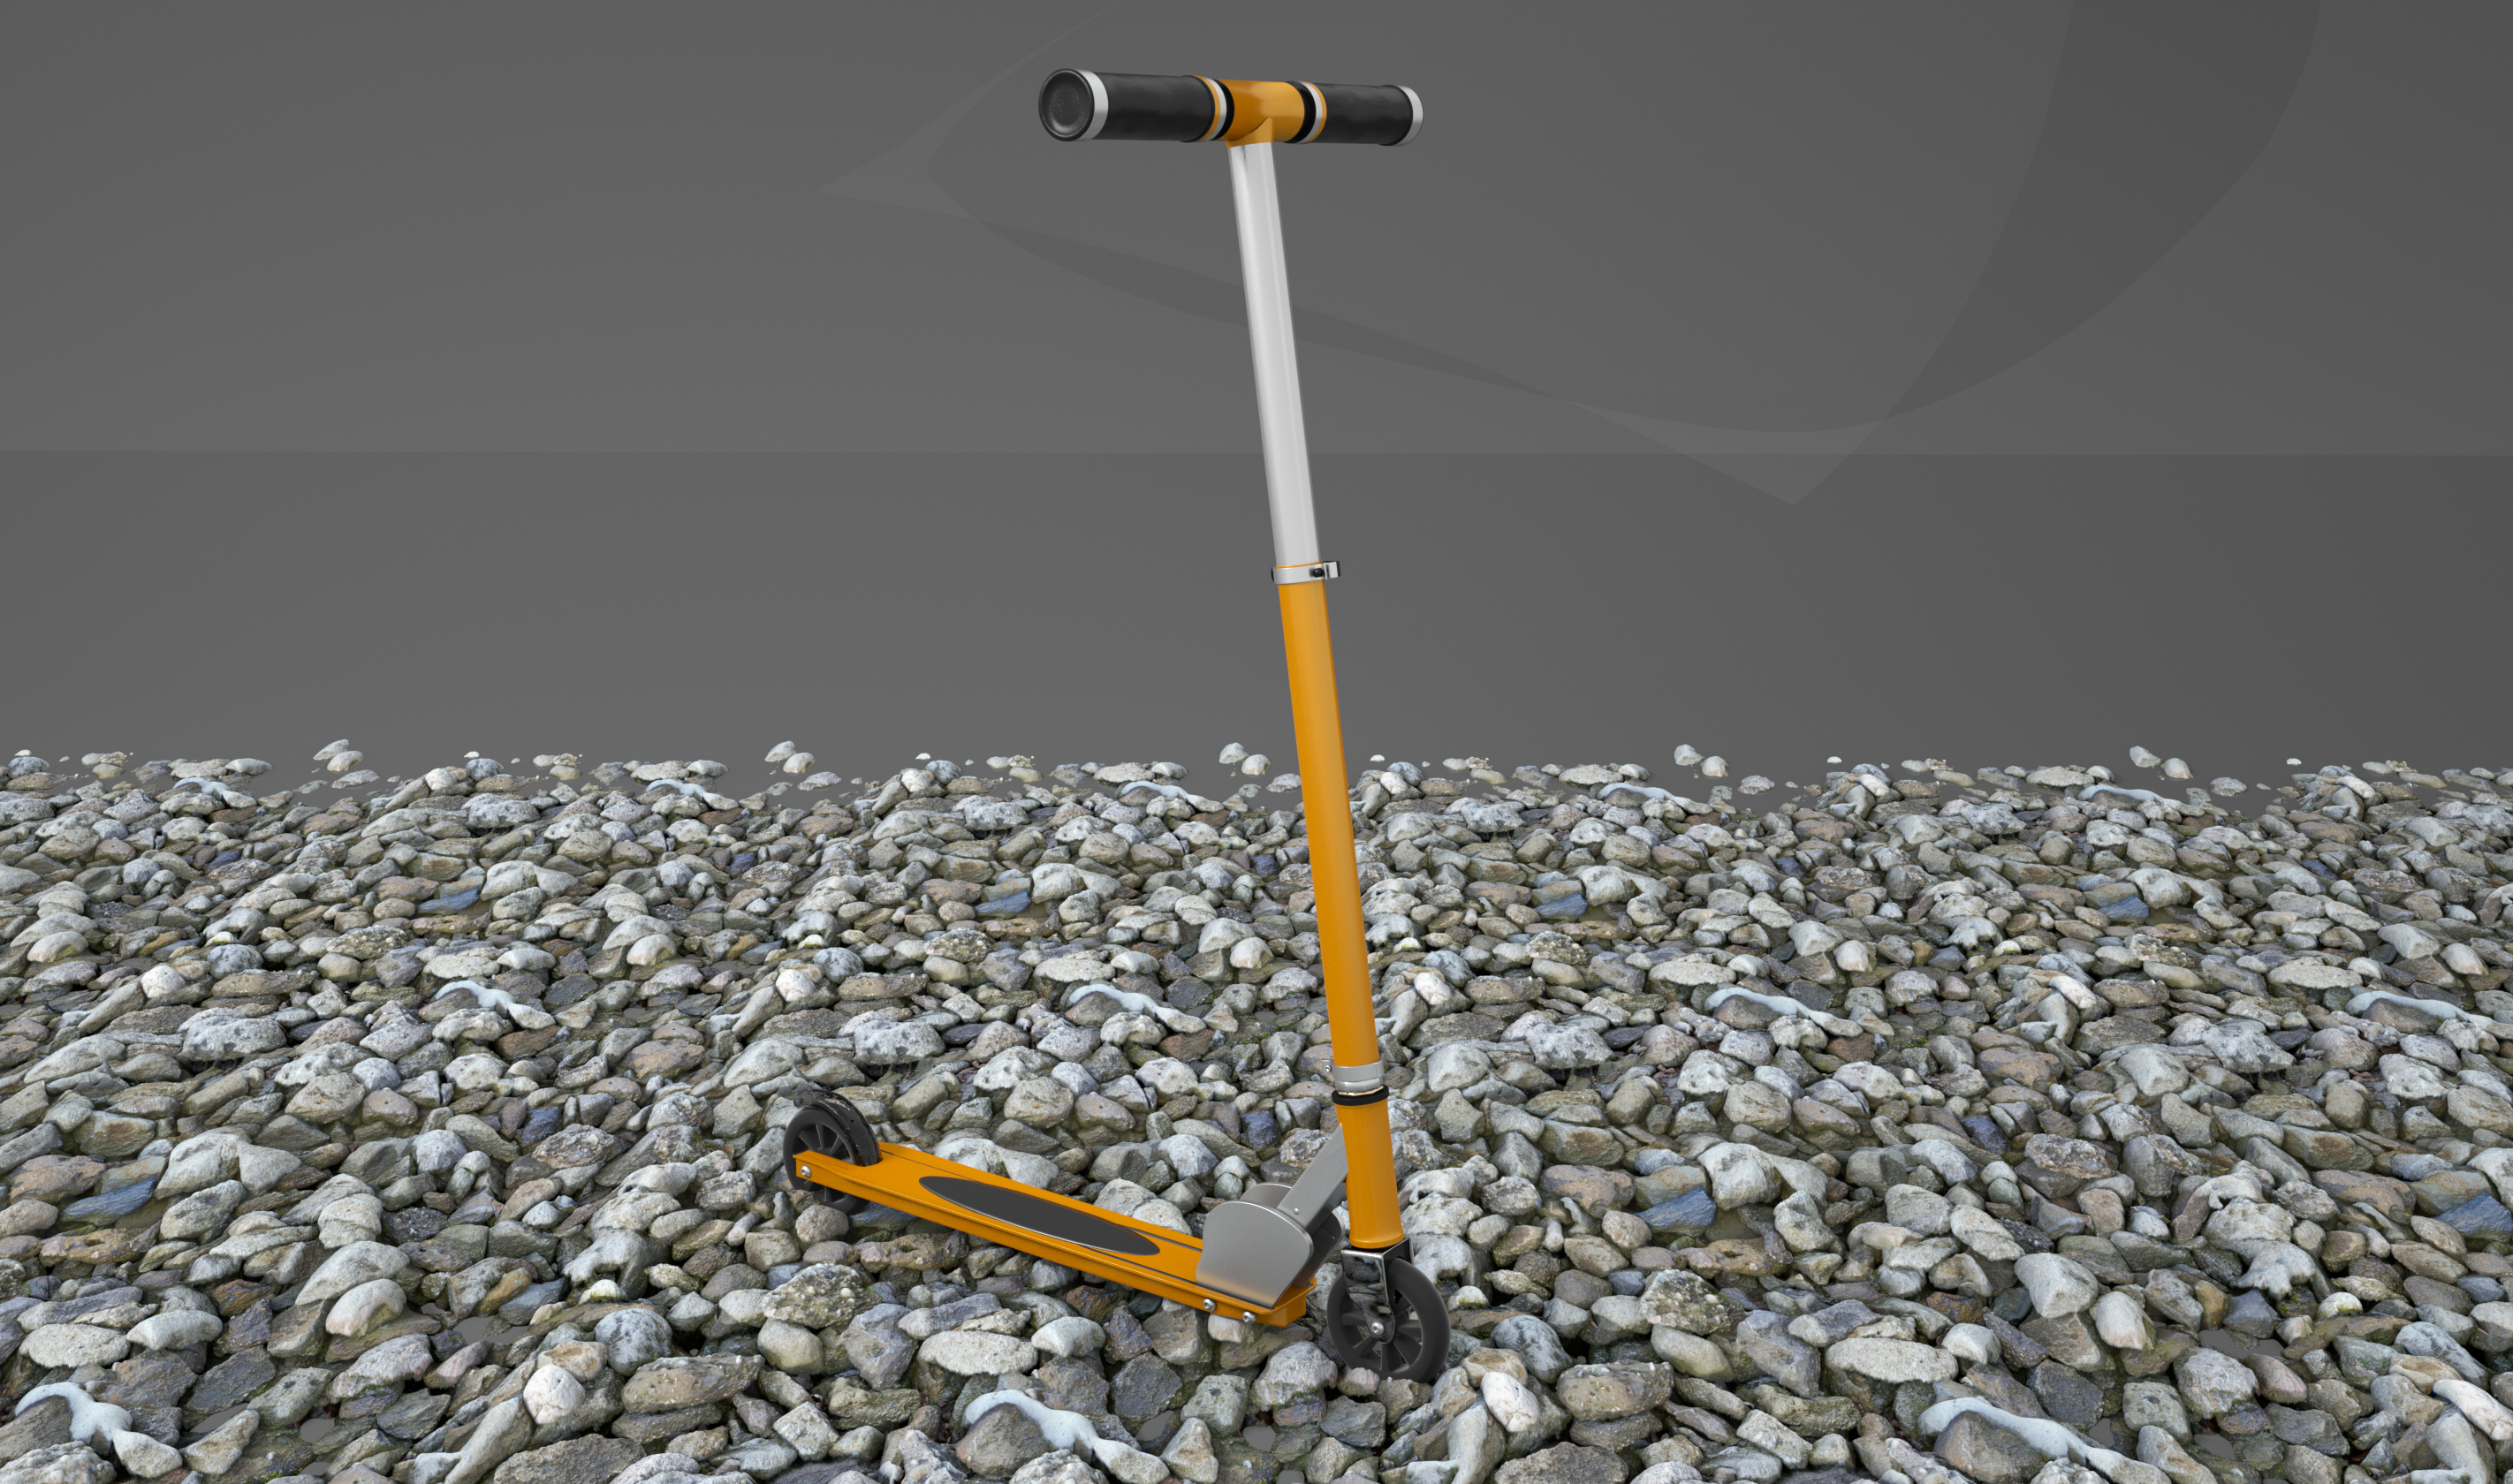 Scooter_0013_Scooter_01